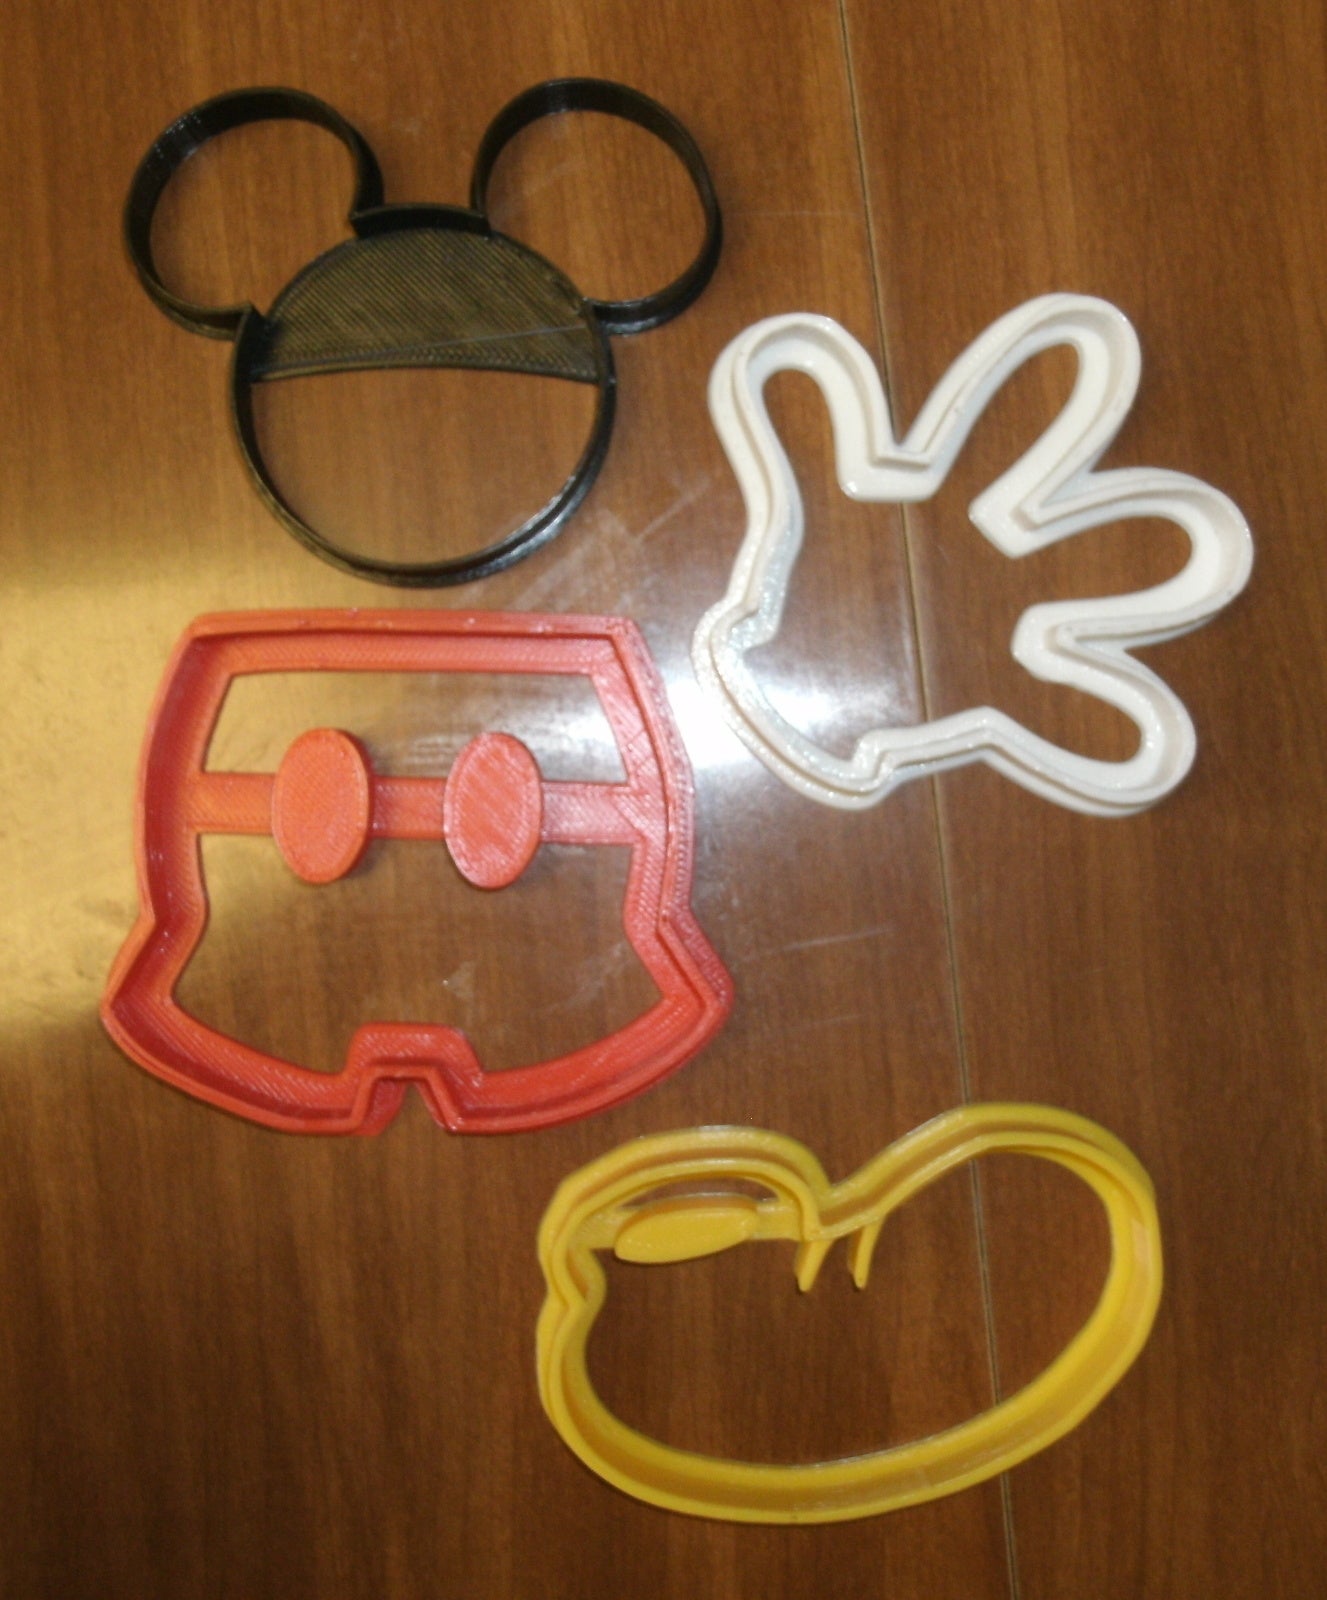 Mickey Mouse Cartoon Character Set of 4 Cookie Cutters USA PR506